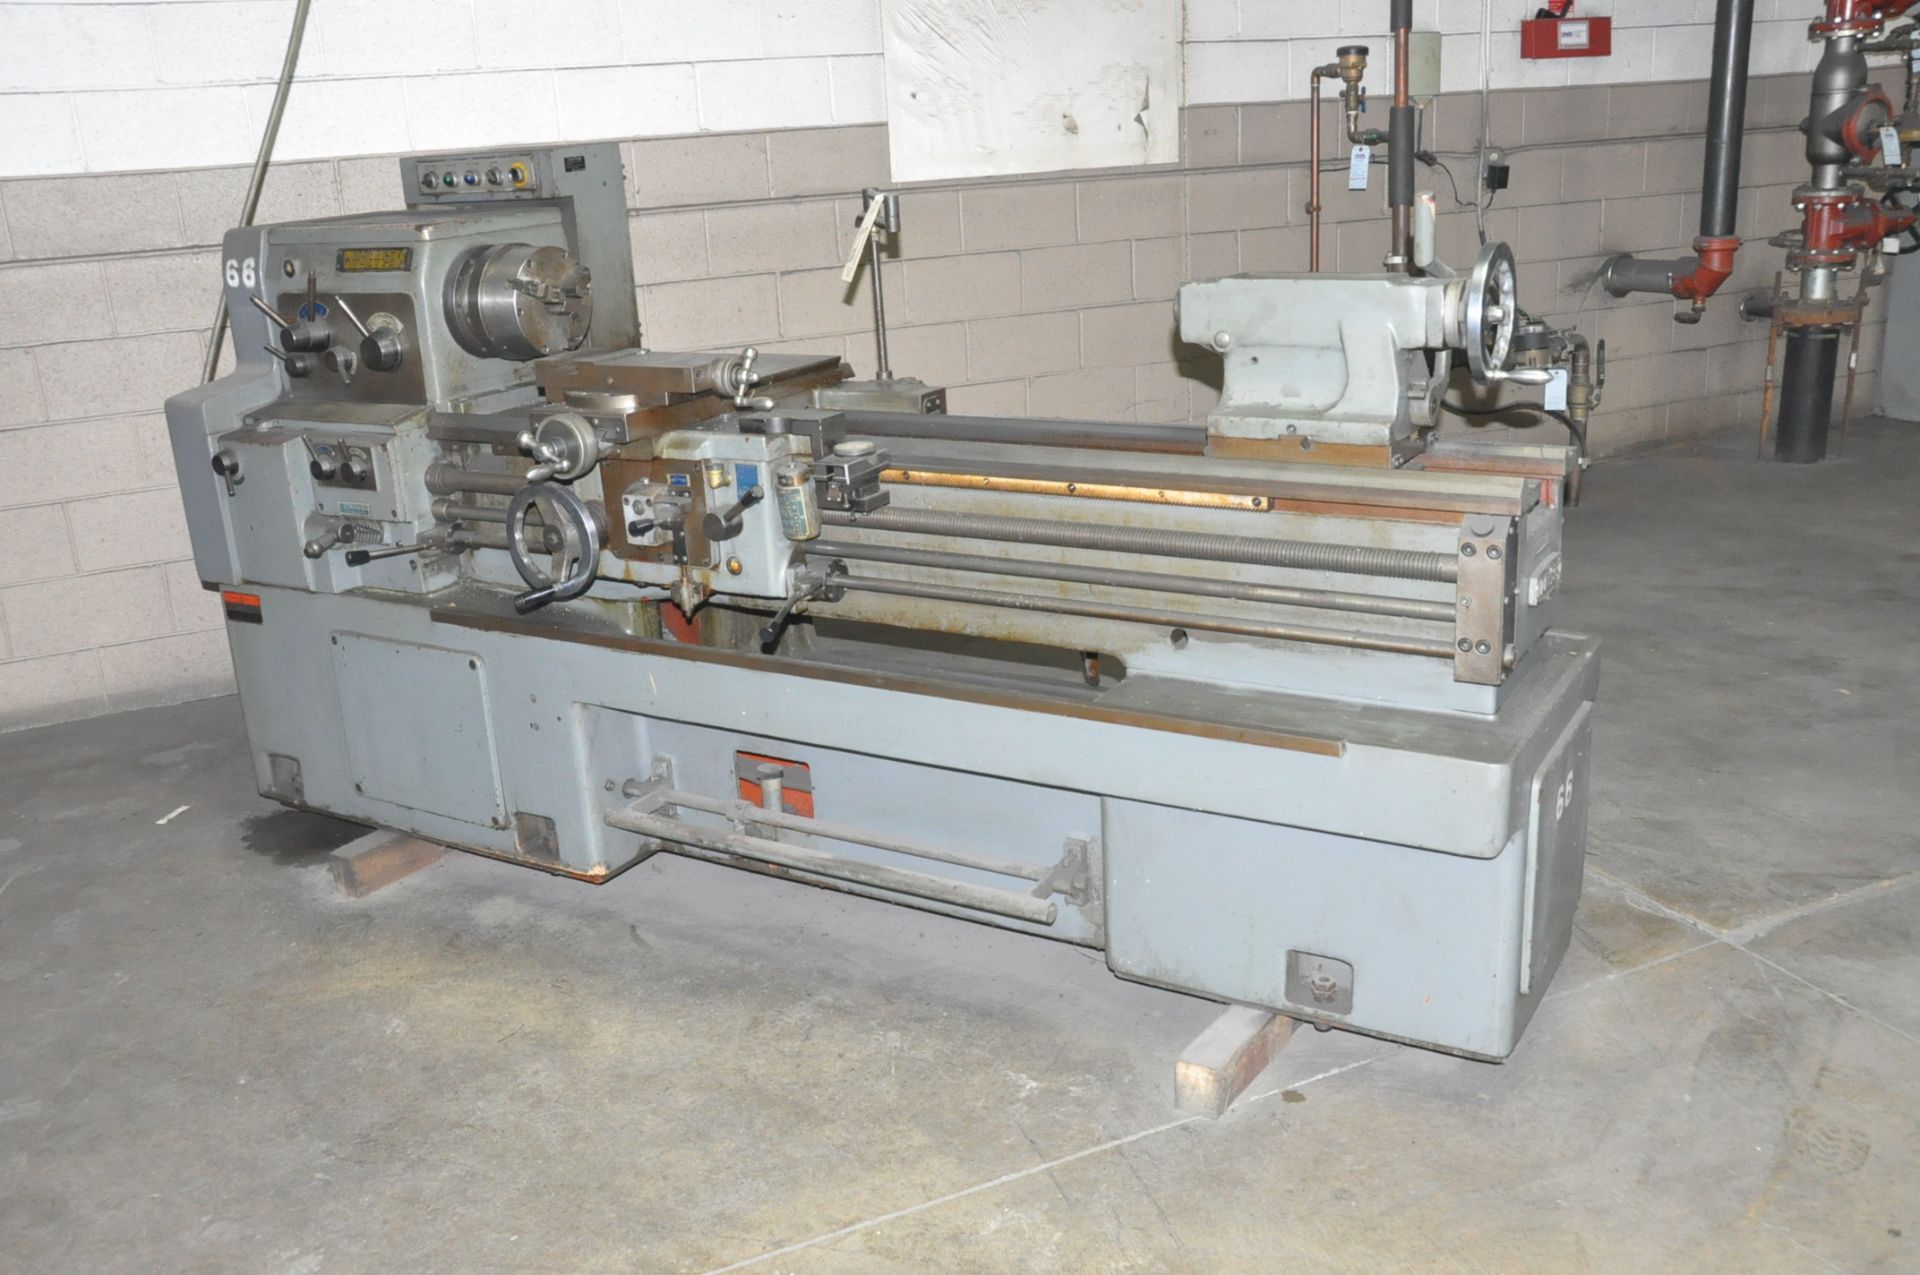 WHACHEON 17" x 59" CC QUICK CHANGE GEARED HEAD LATHE, S/n 9-8512-09, 32 to 1800 RPM Spindle Speed